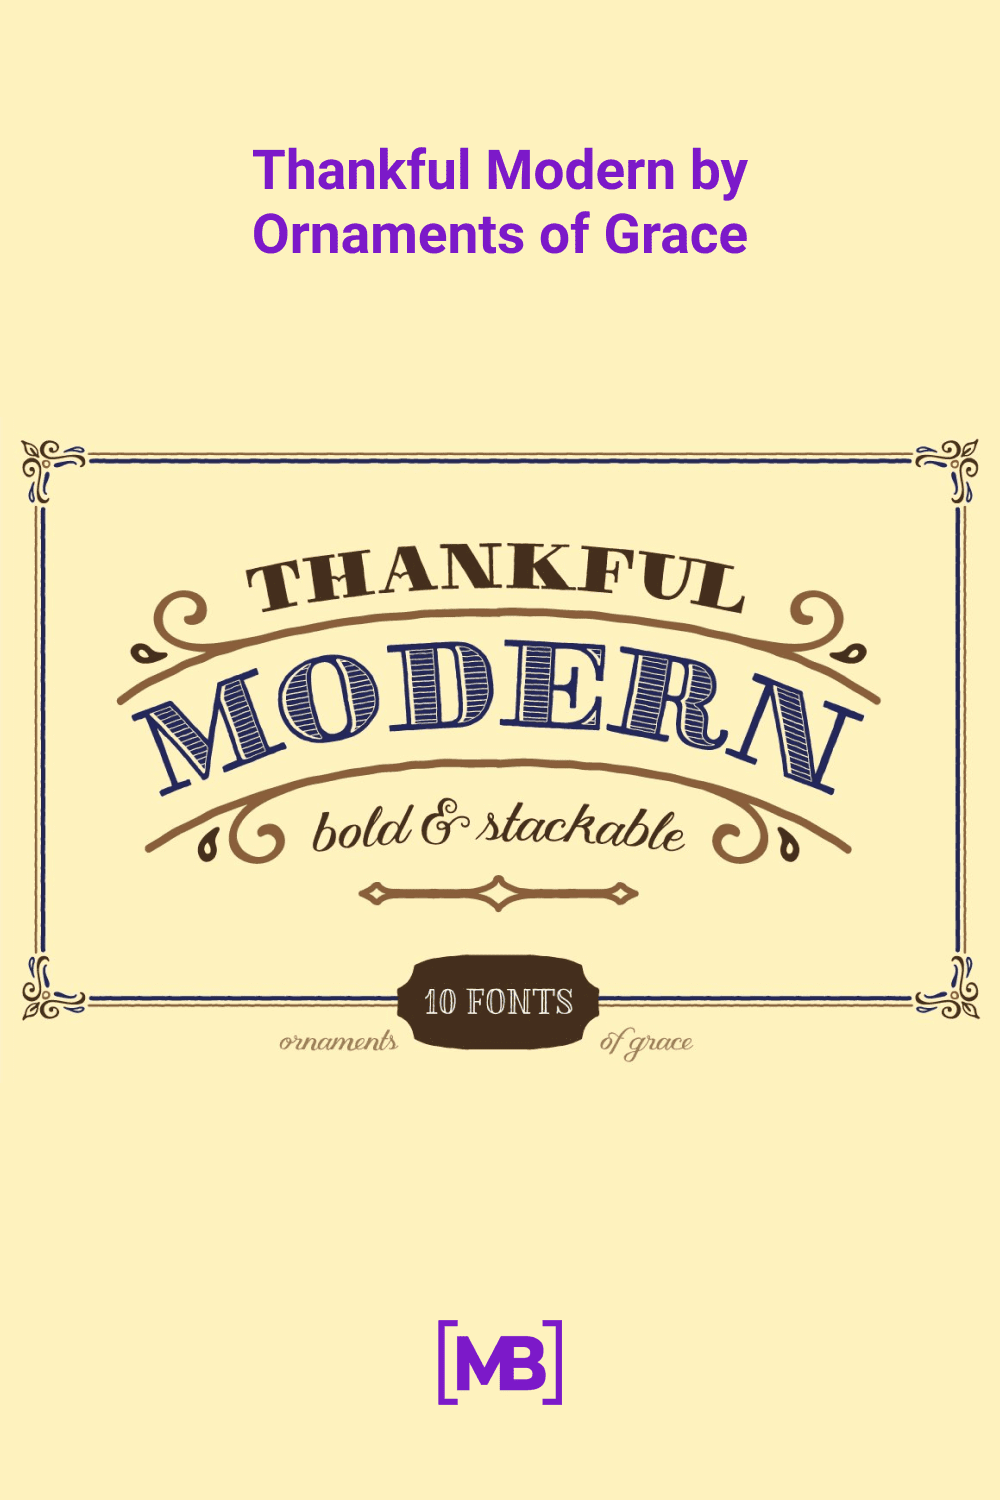 Thankful Modern by Ornaments of Grace.